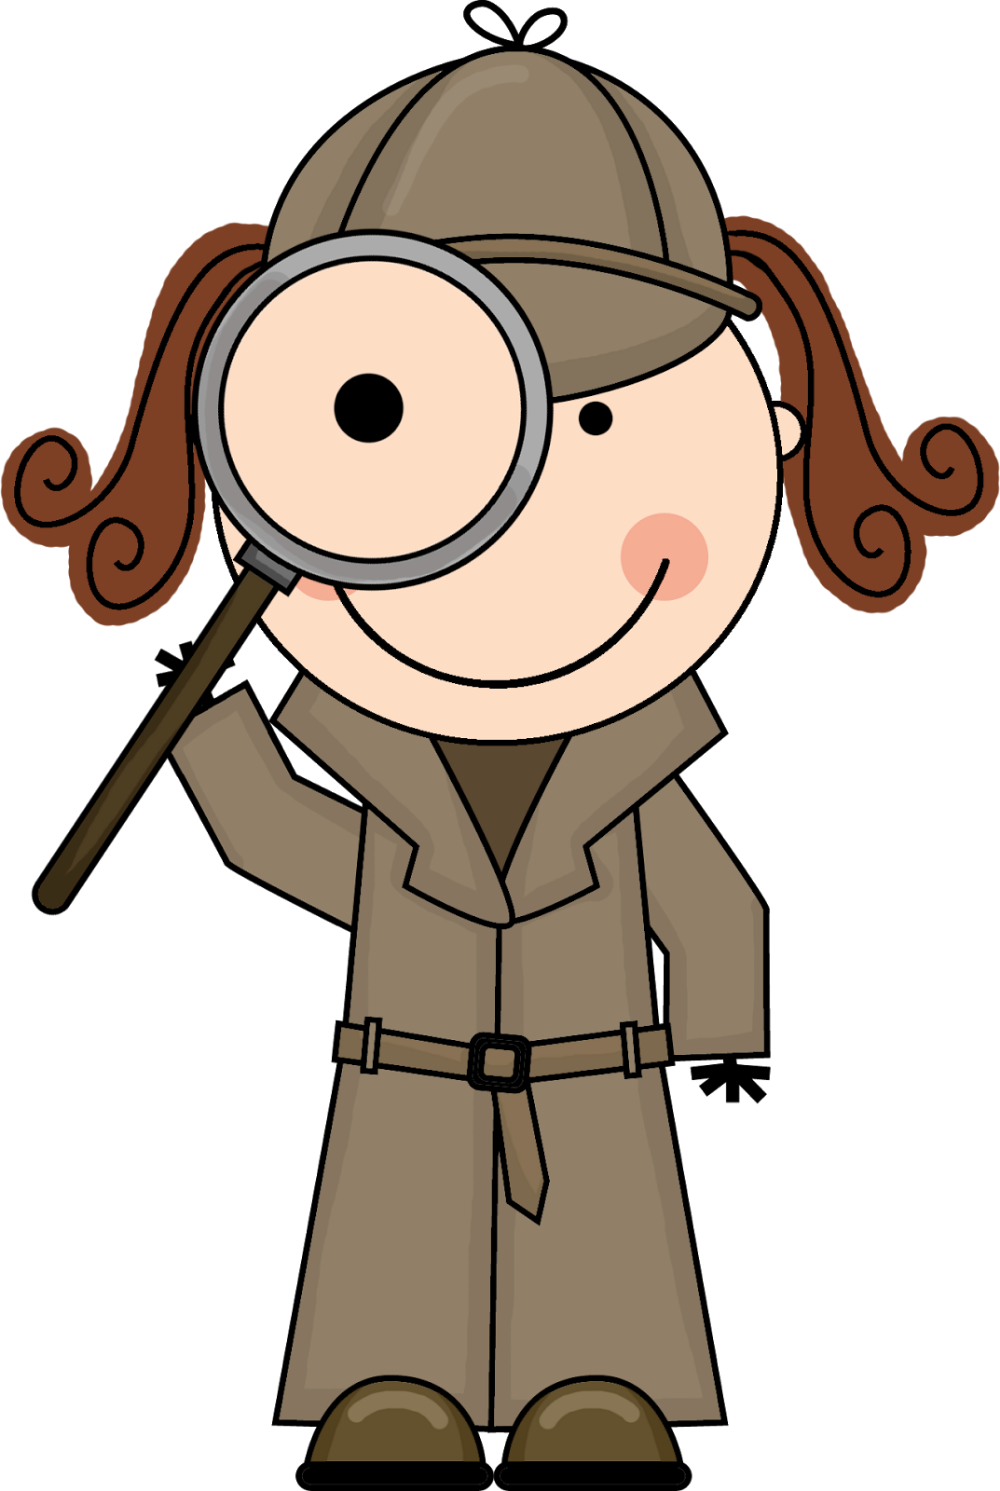 Detective PNG Image File